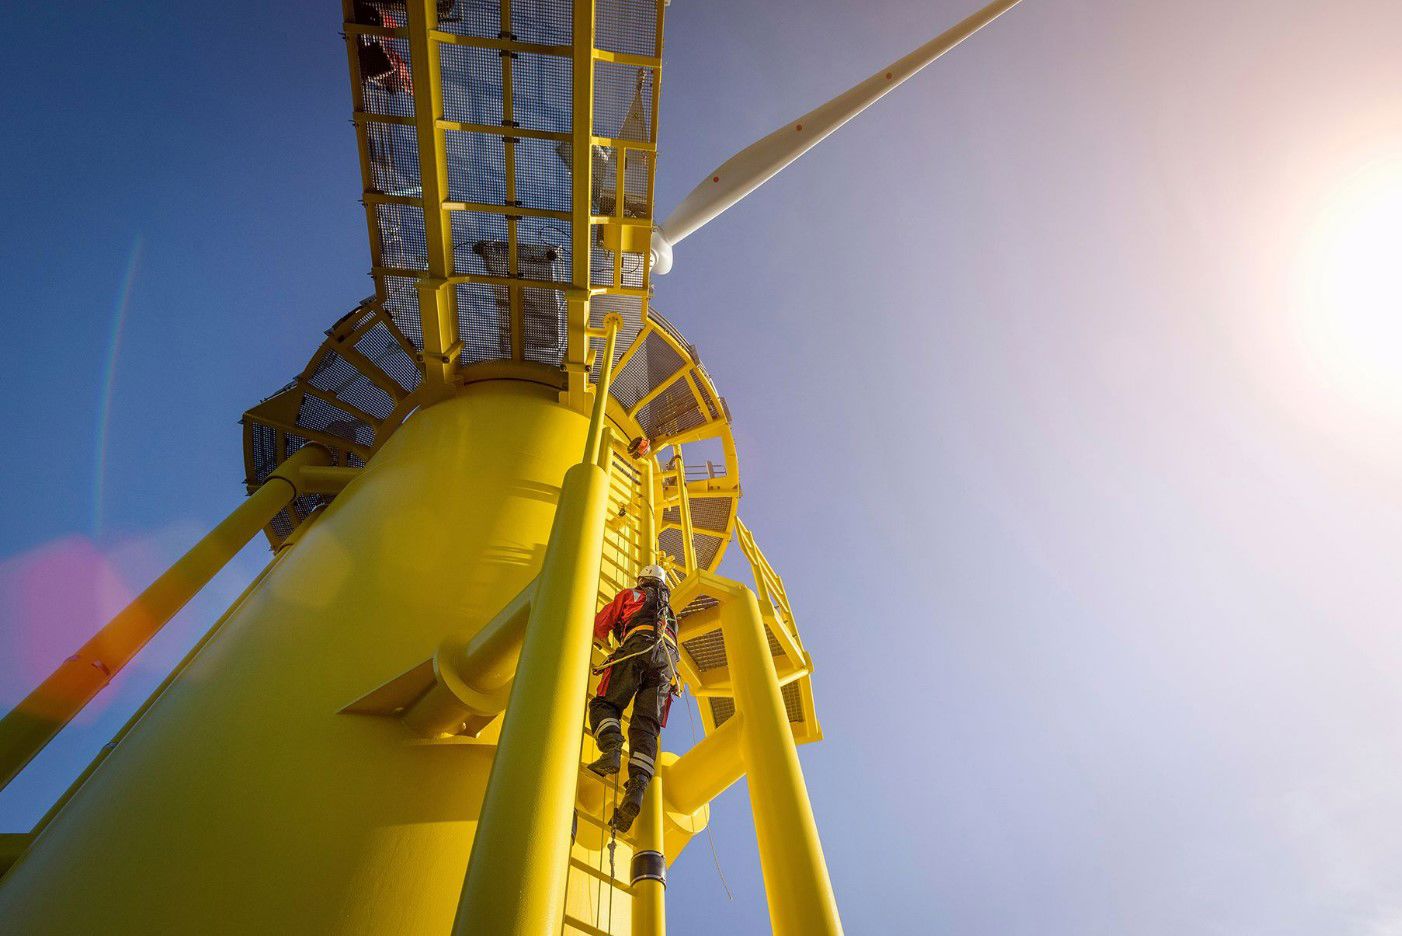 Engineers climbing wind turbine from boat at offshore windfarm, low angle view